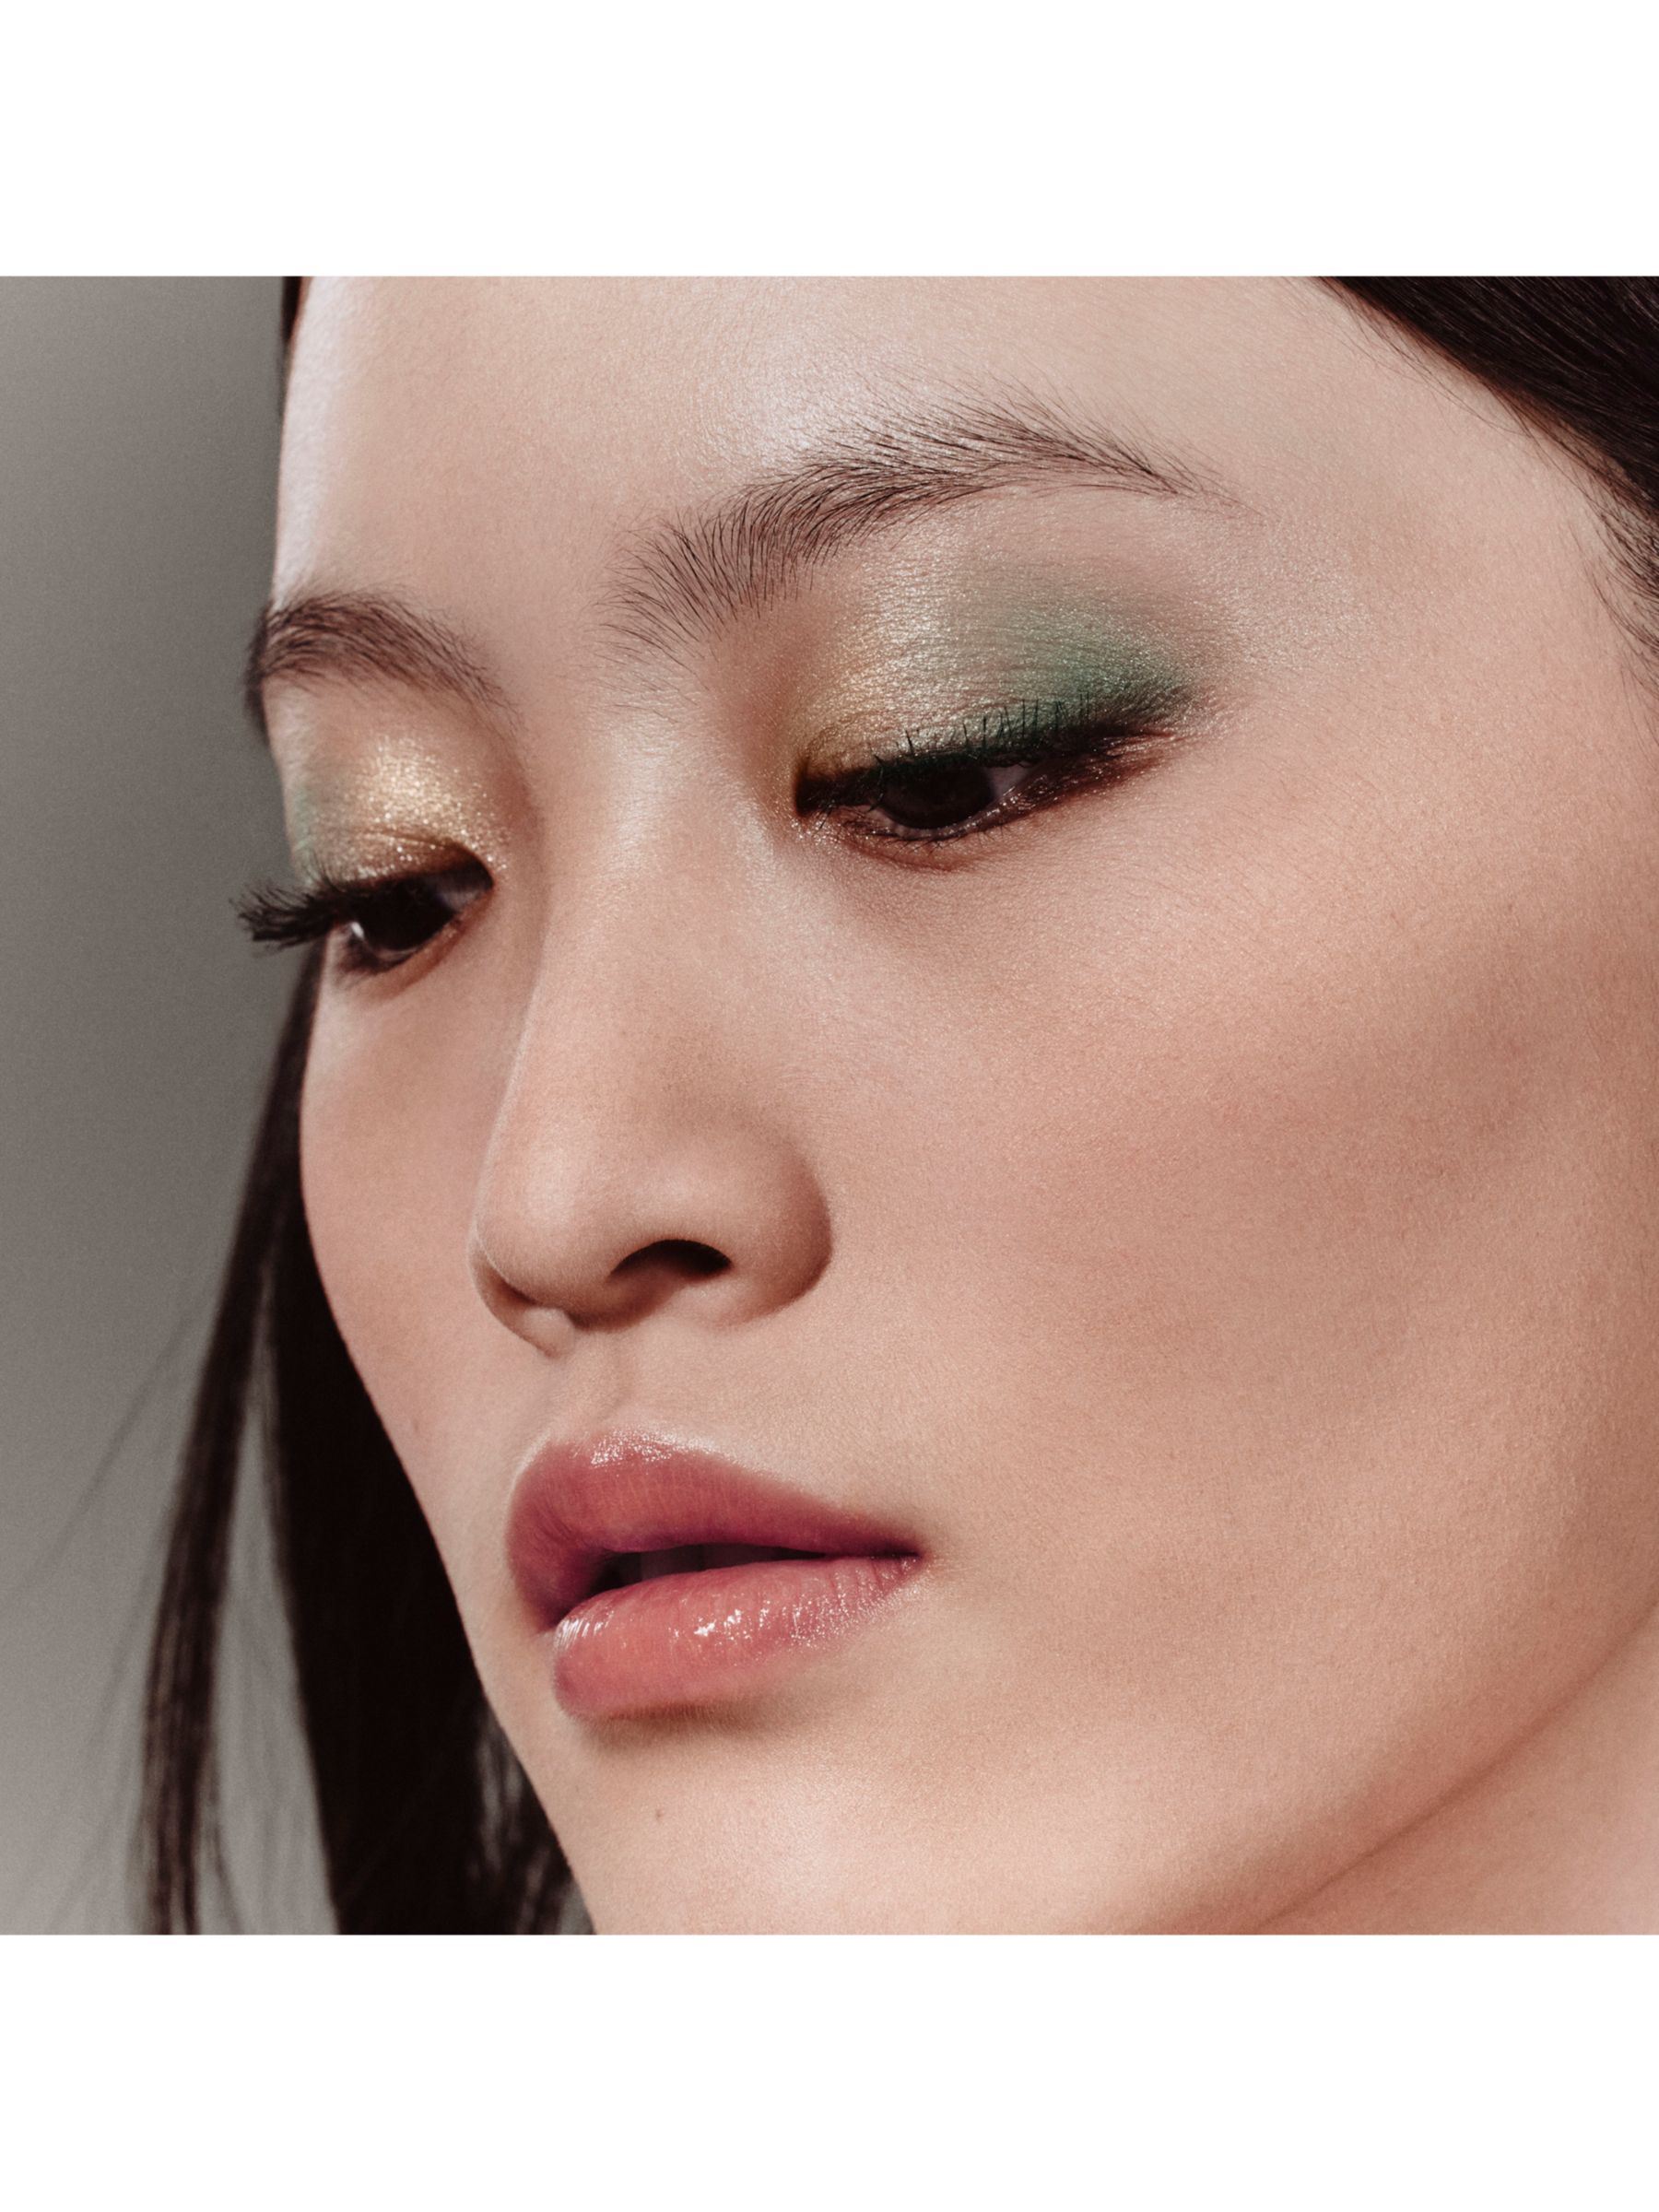 Ombres D'Hermes Eyeshadow Quartet, 04 Ombres Marines